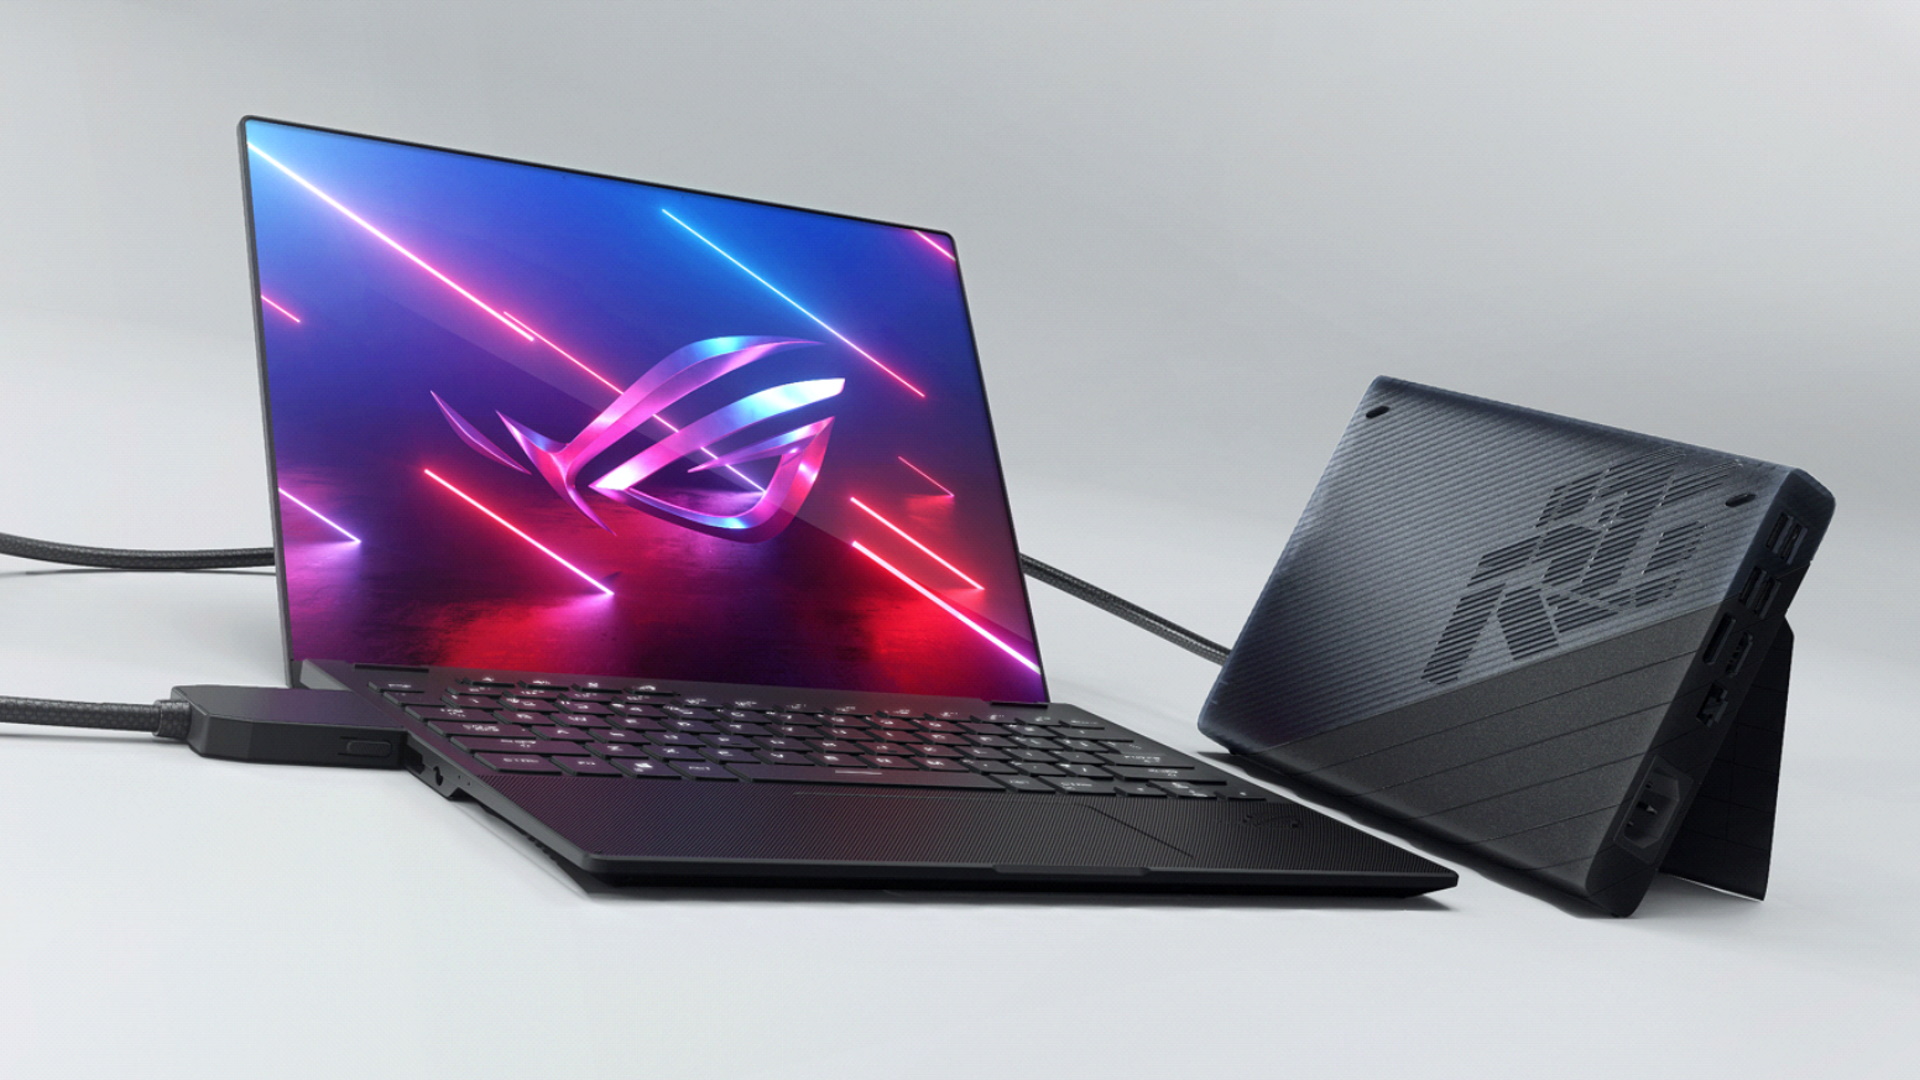 The Asus ROG Flow X13 is the most exciting laptop at CES 2021 PC Gamer